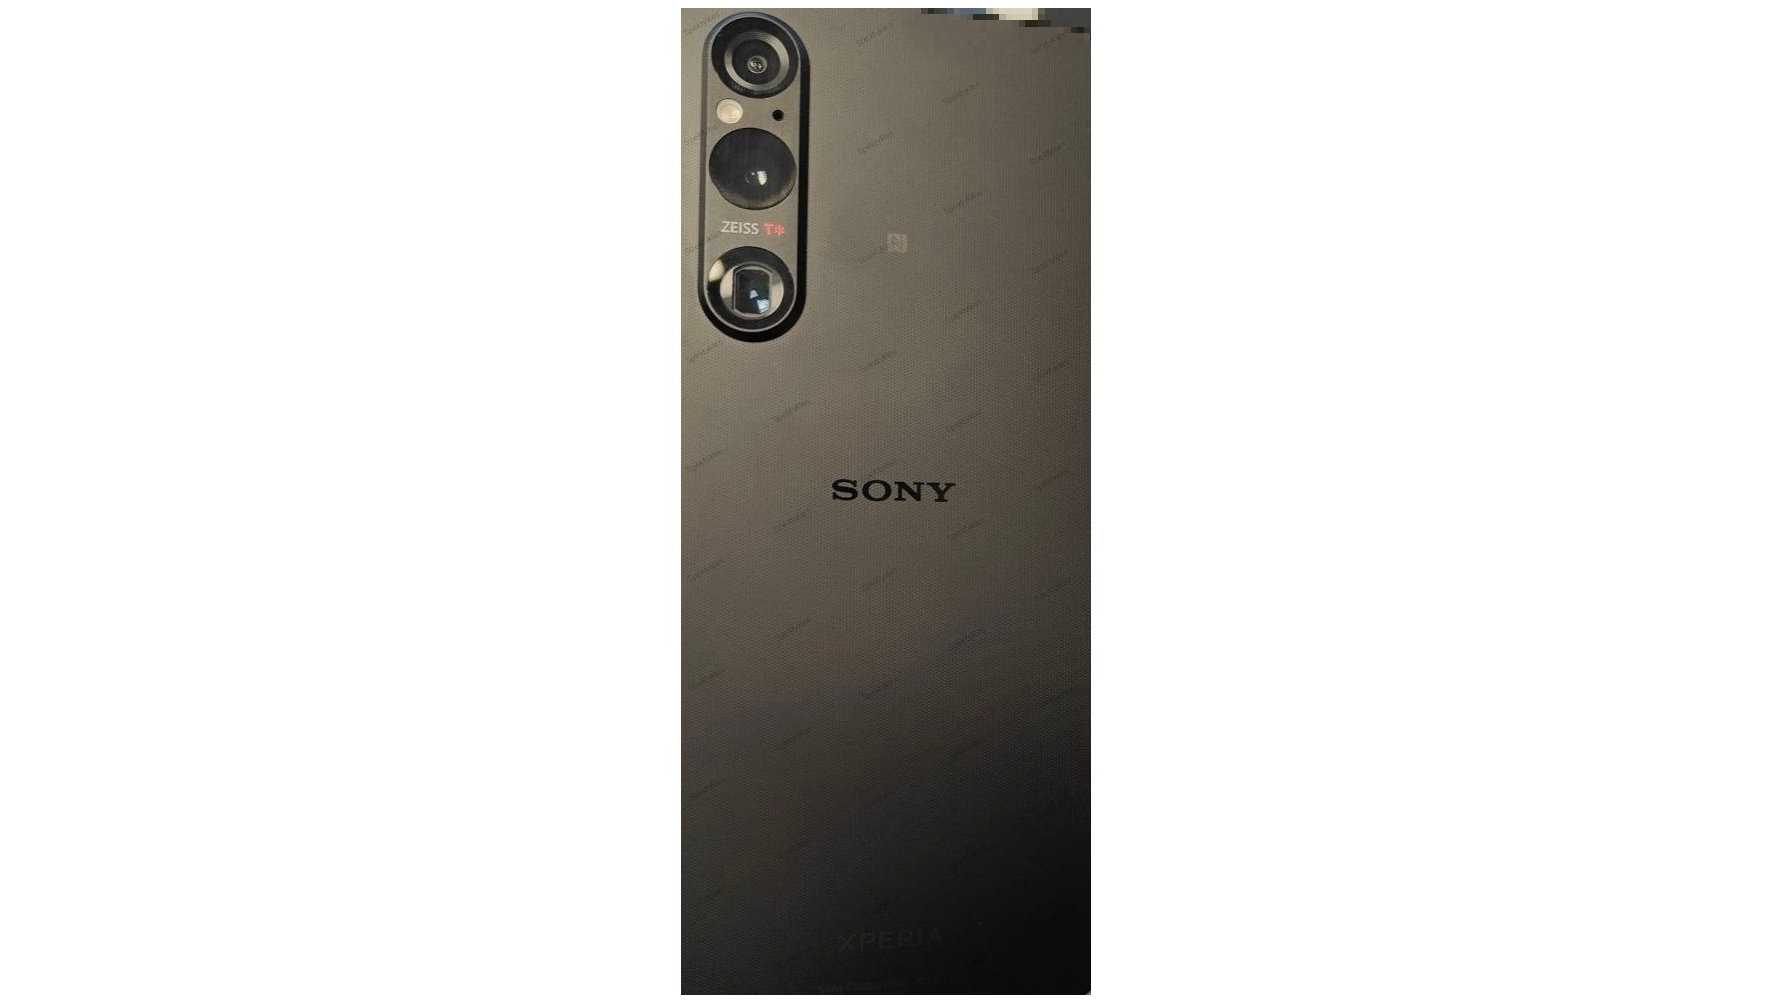 A leaked image shows the back of the Sony Xperia 1 V